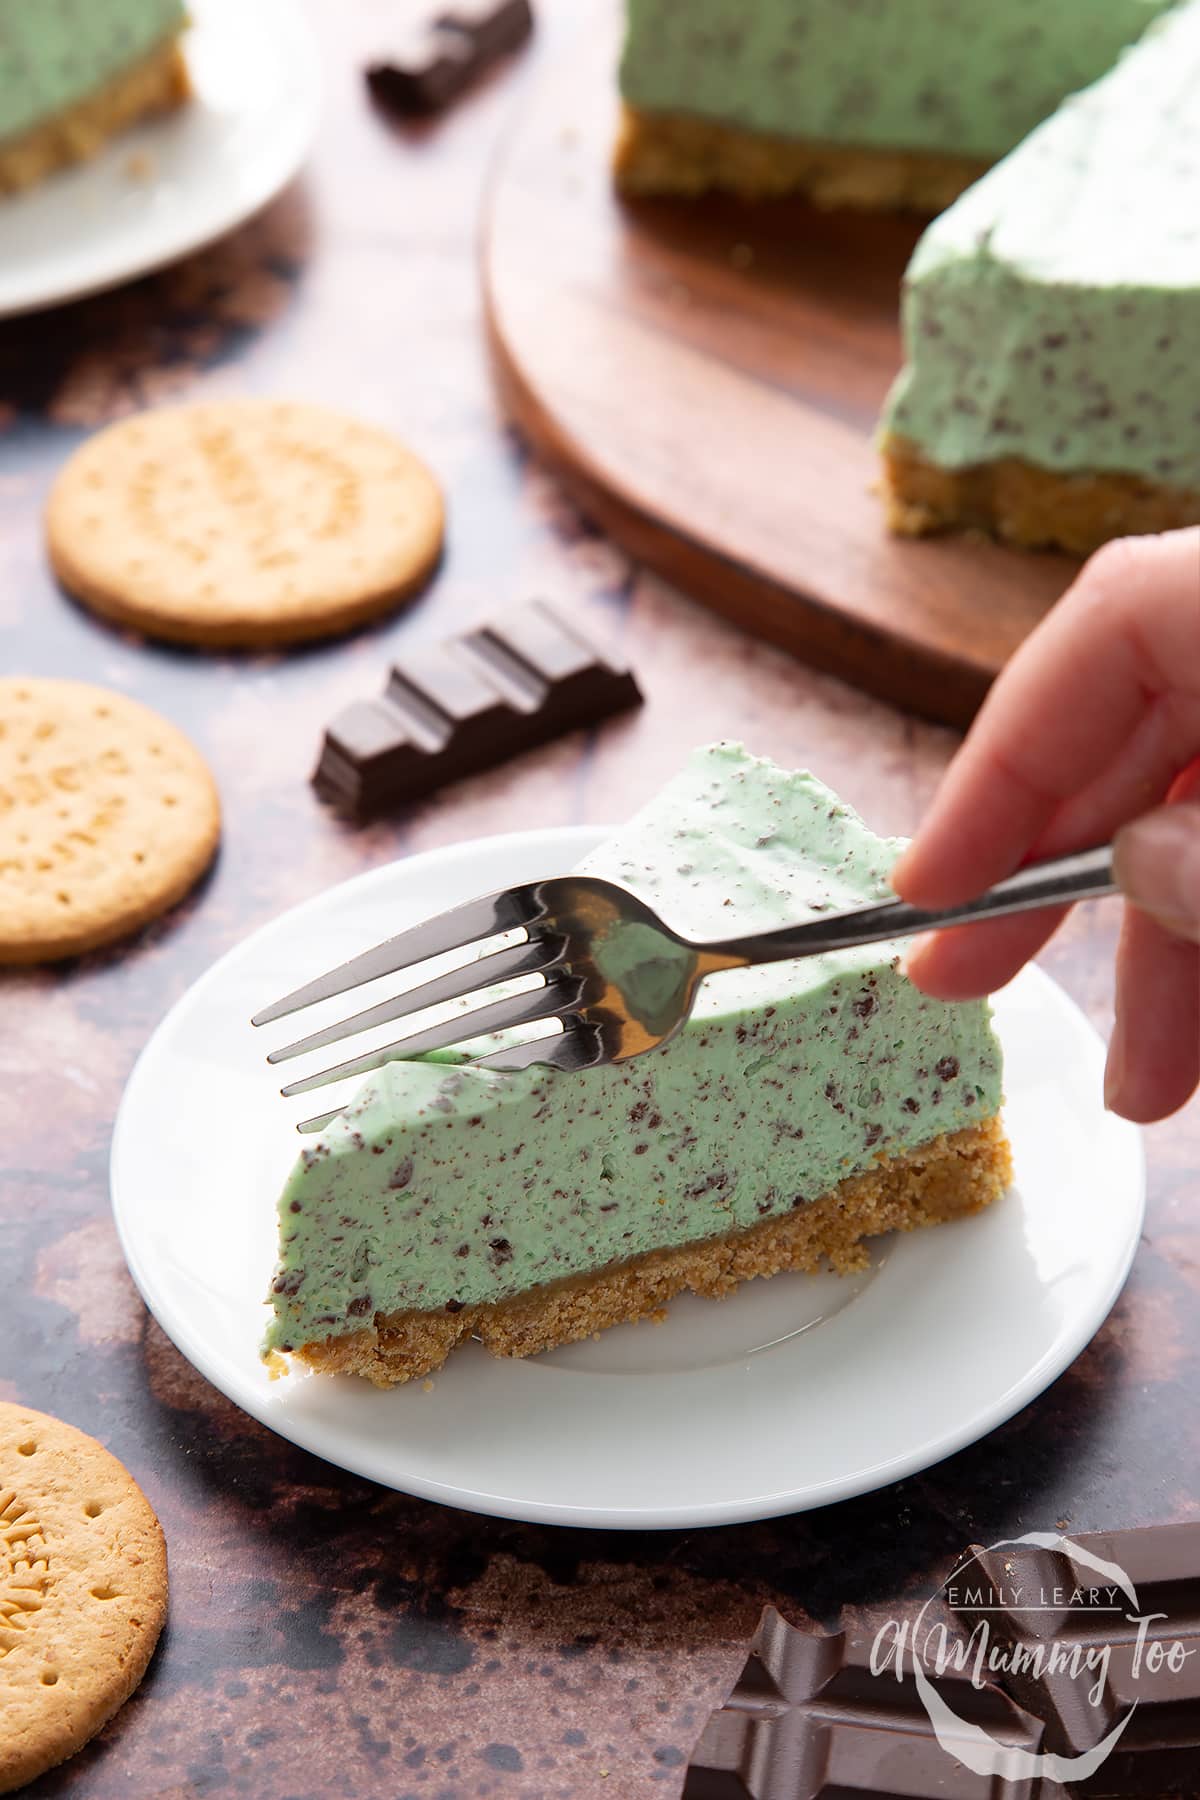 A slice of no bake mint cheesecake with a biscuit base on a white plate with a hand holding a fork.